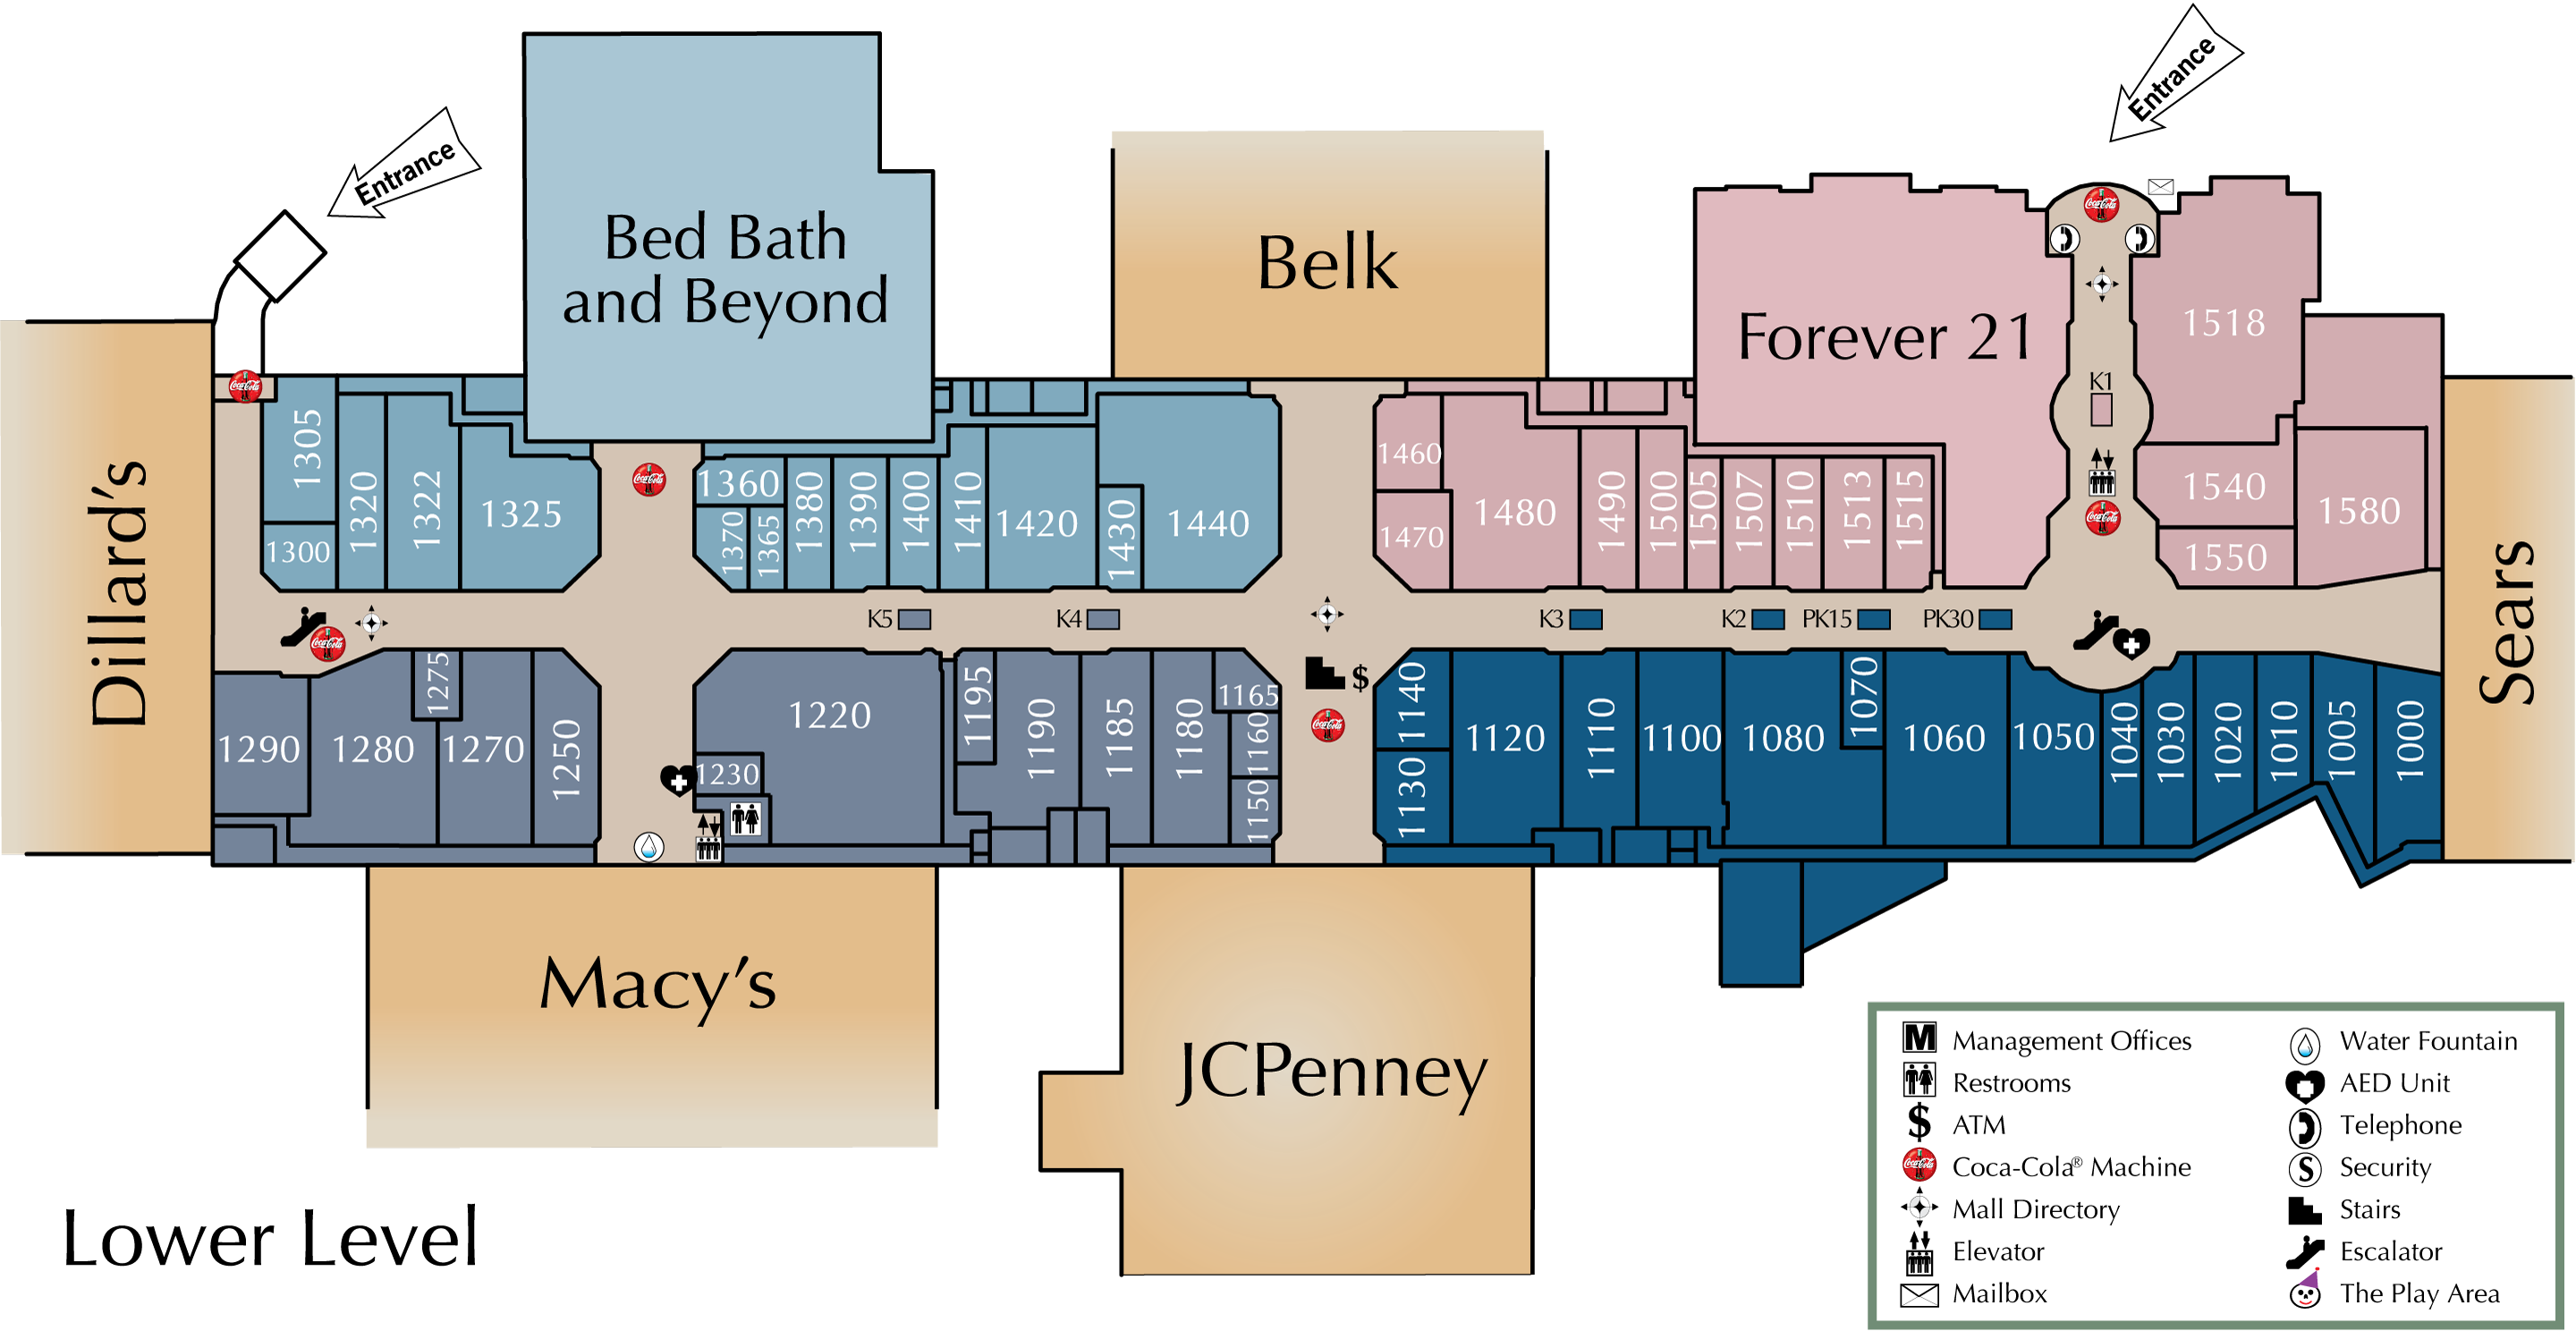 Jewelry Store Floor Plan Mall Directory Arbor Place